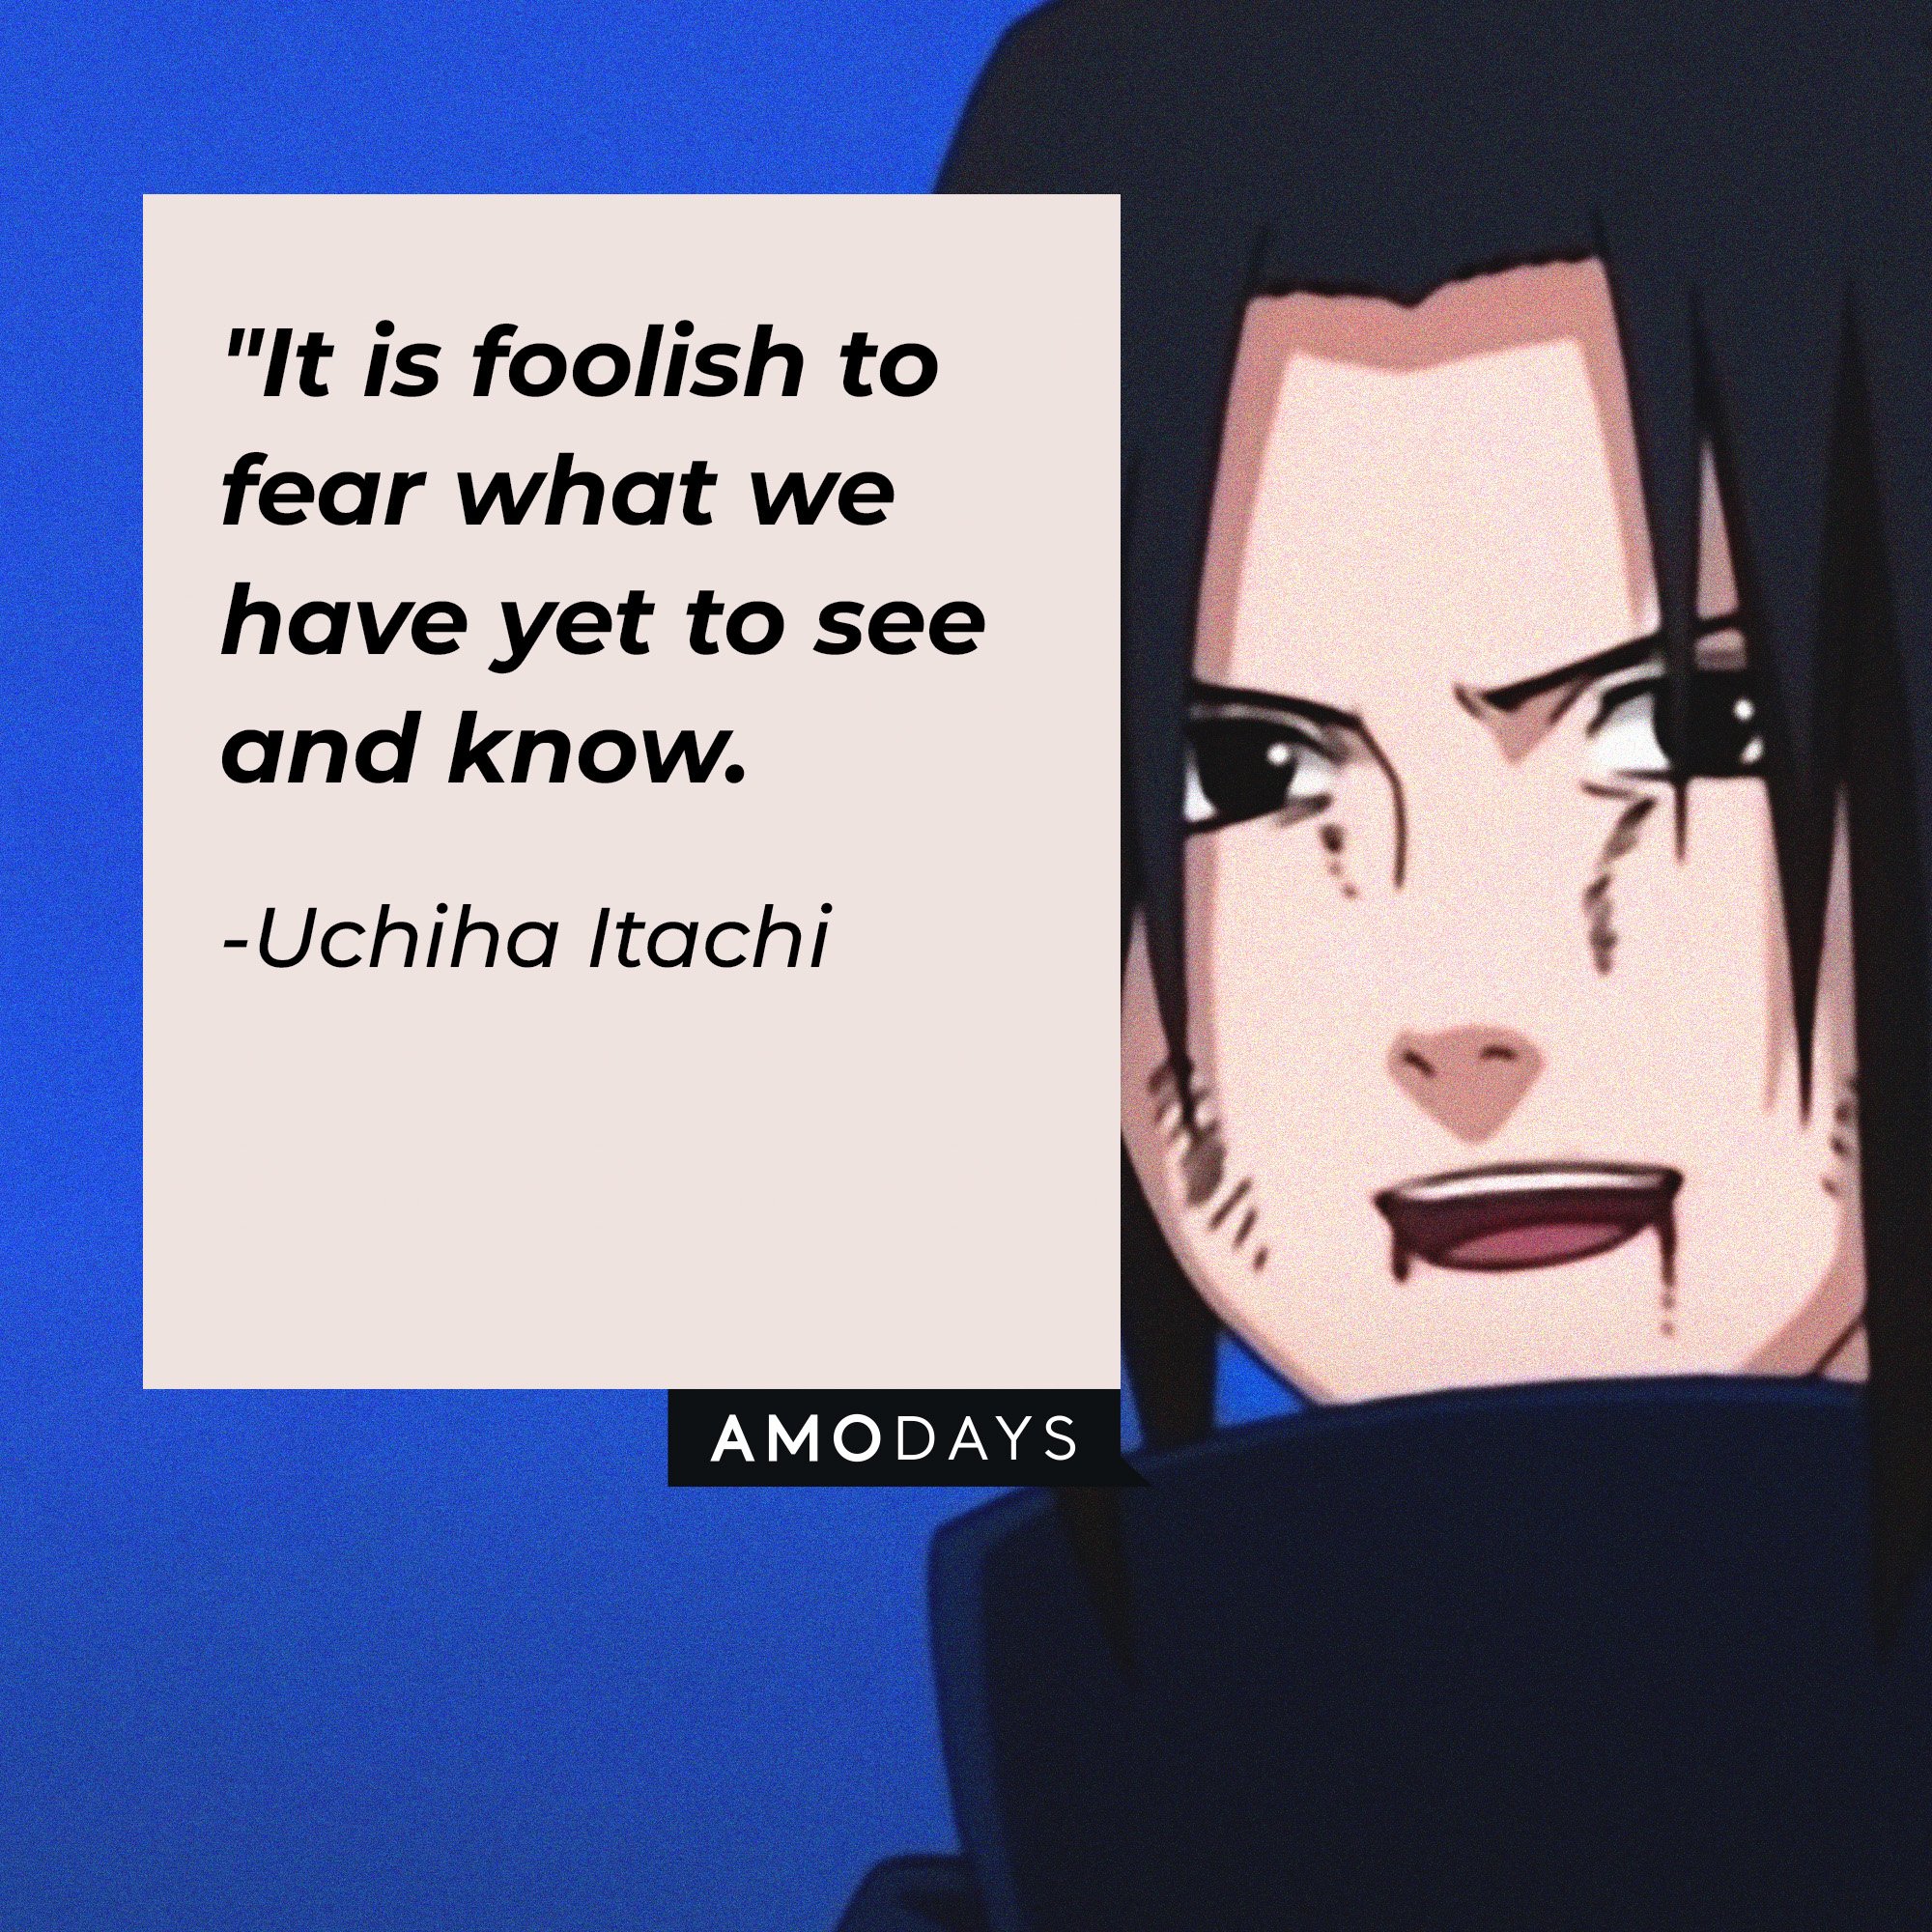 Uchiha Itachi 's quote: "It is foolish to fear what we have yet to see and know. | Image: AmoDays